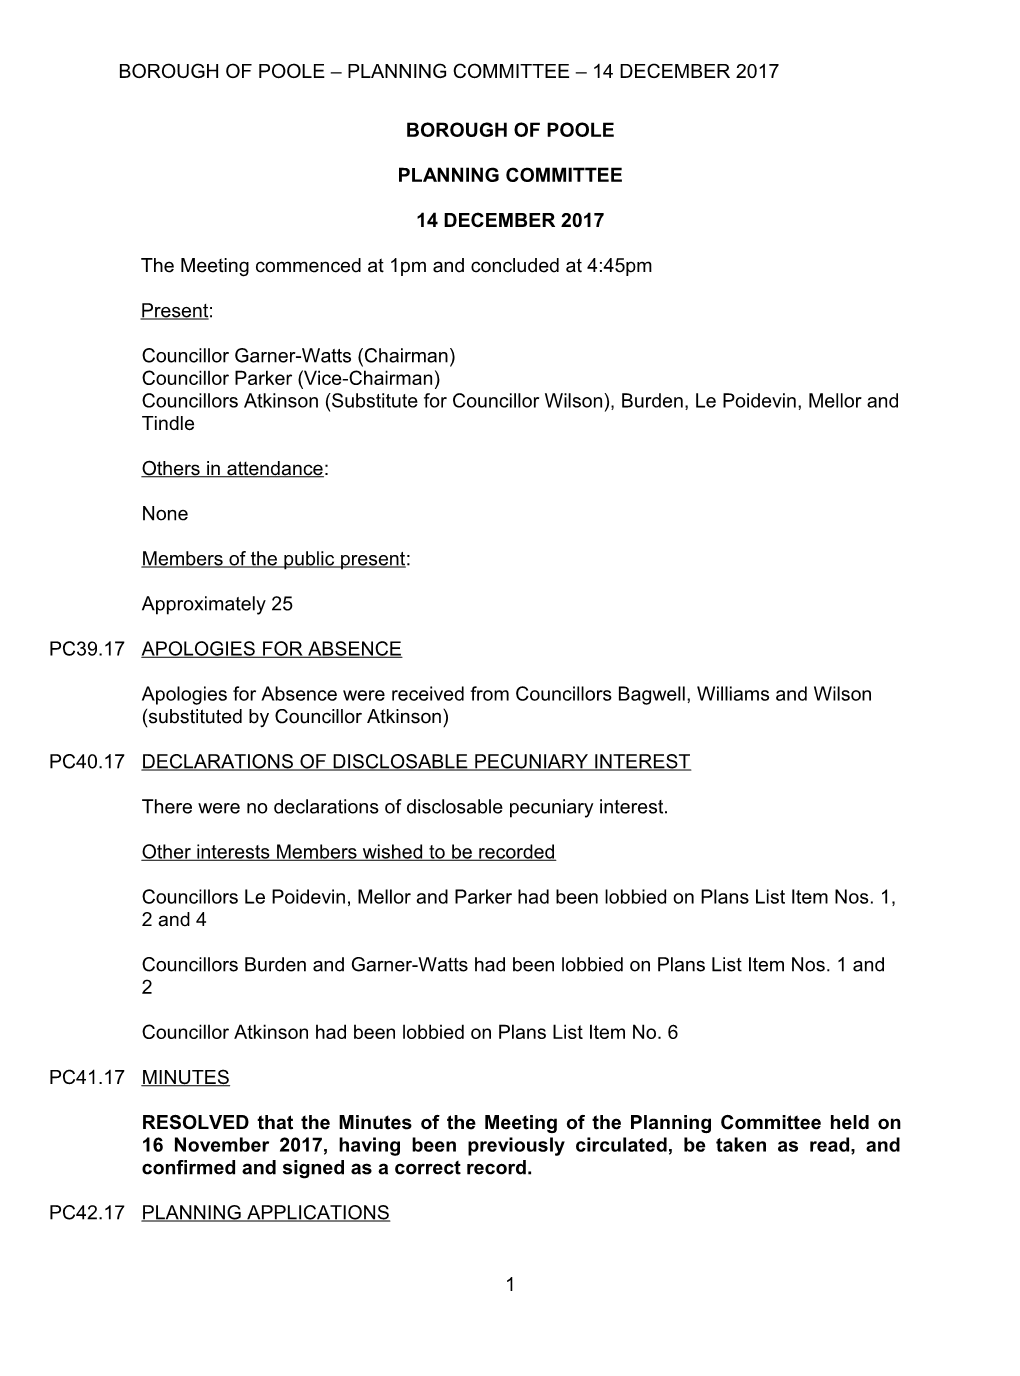 Borough of Poole Planning Committee 14 December 2017